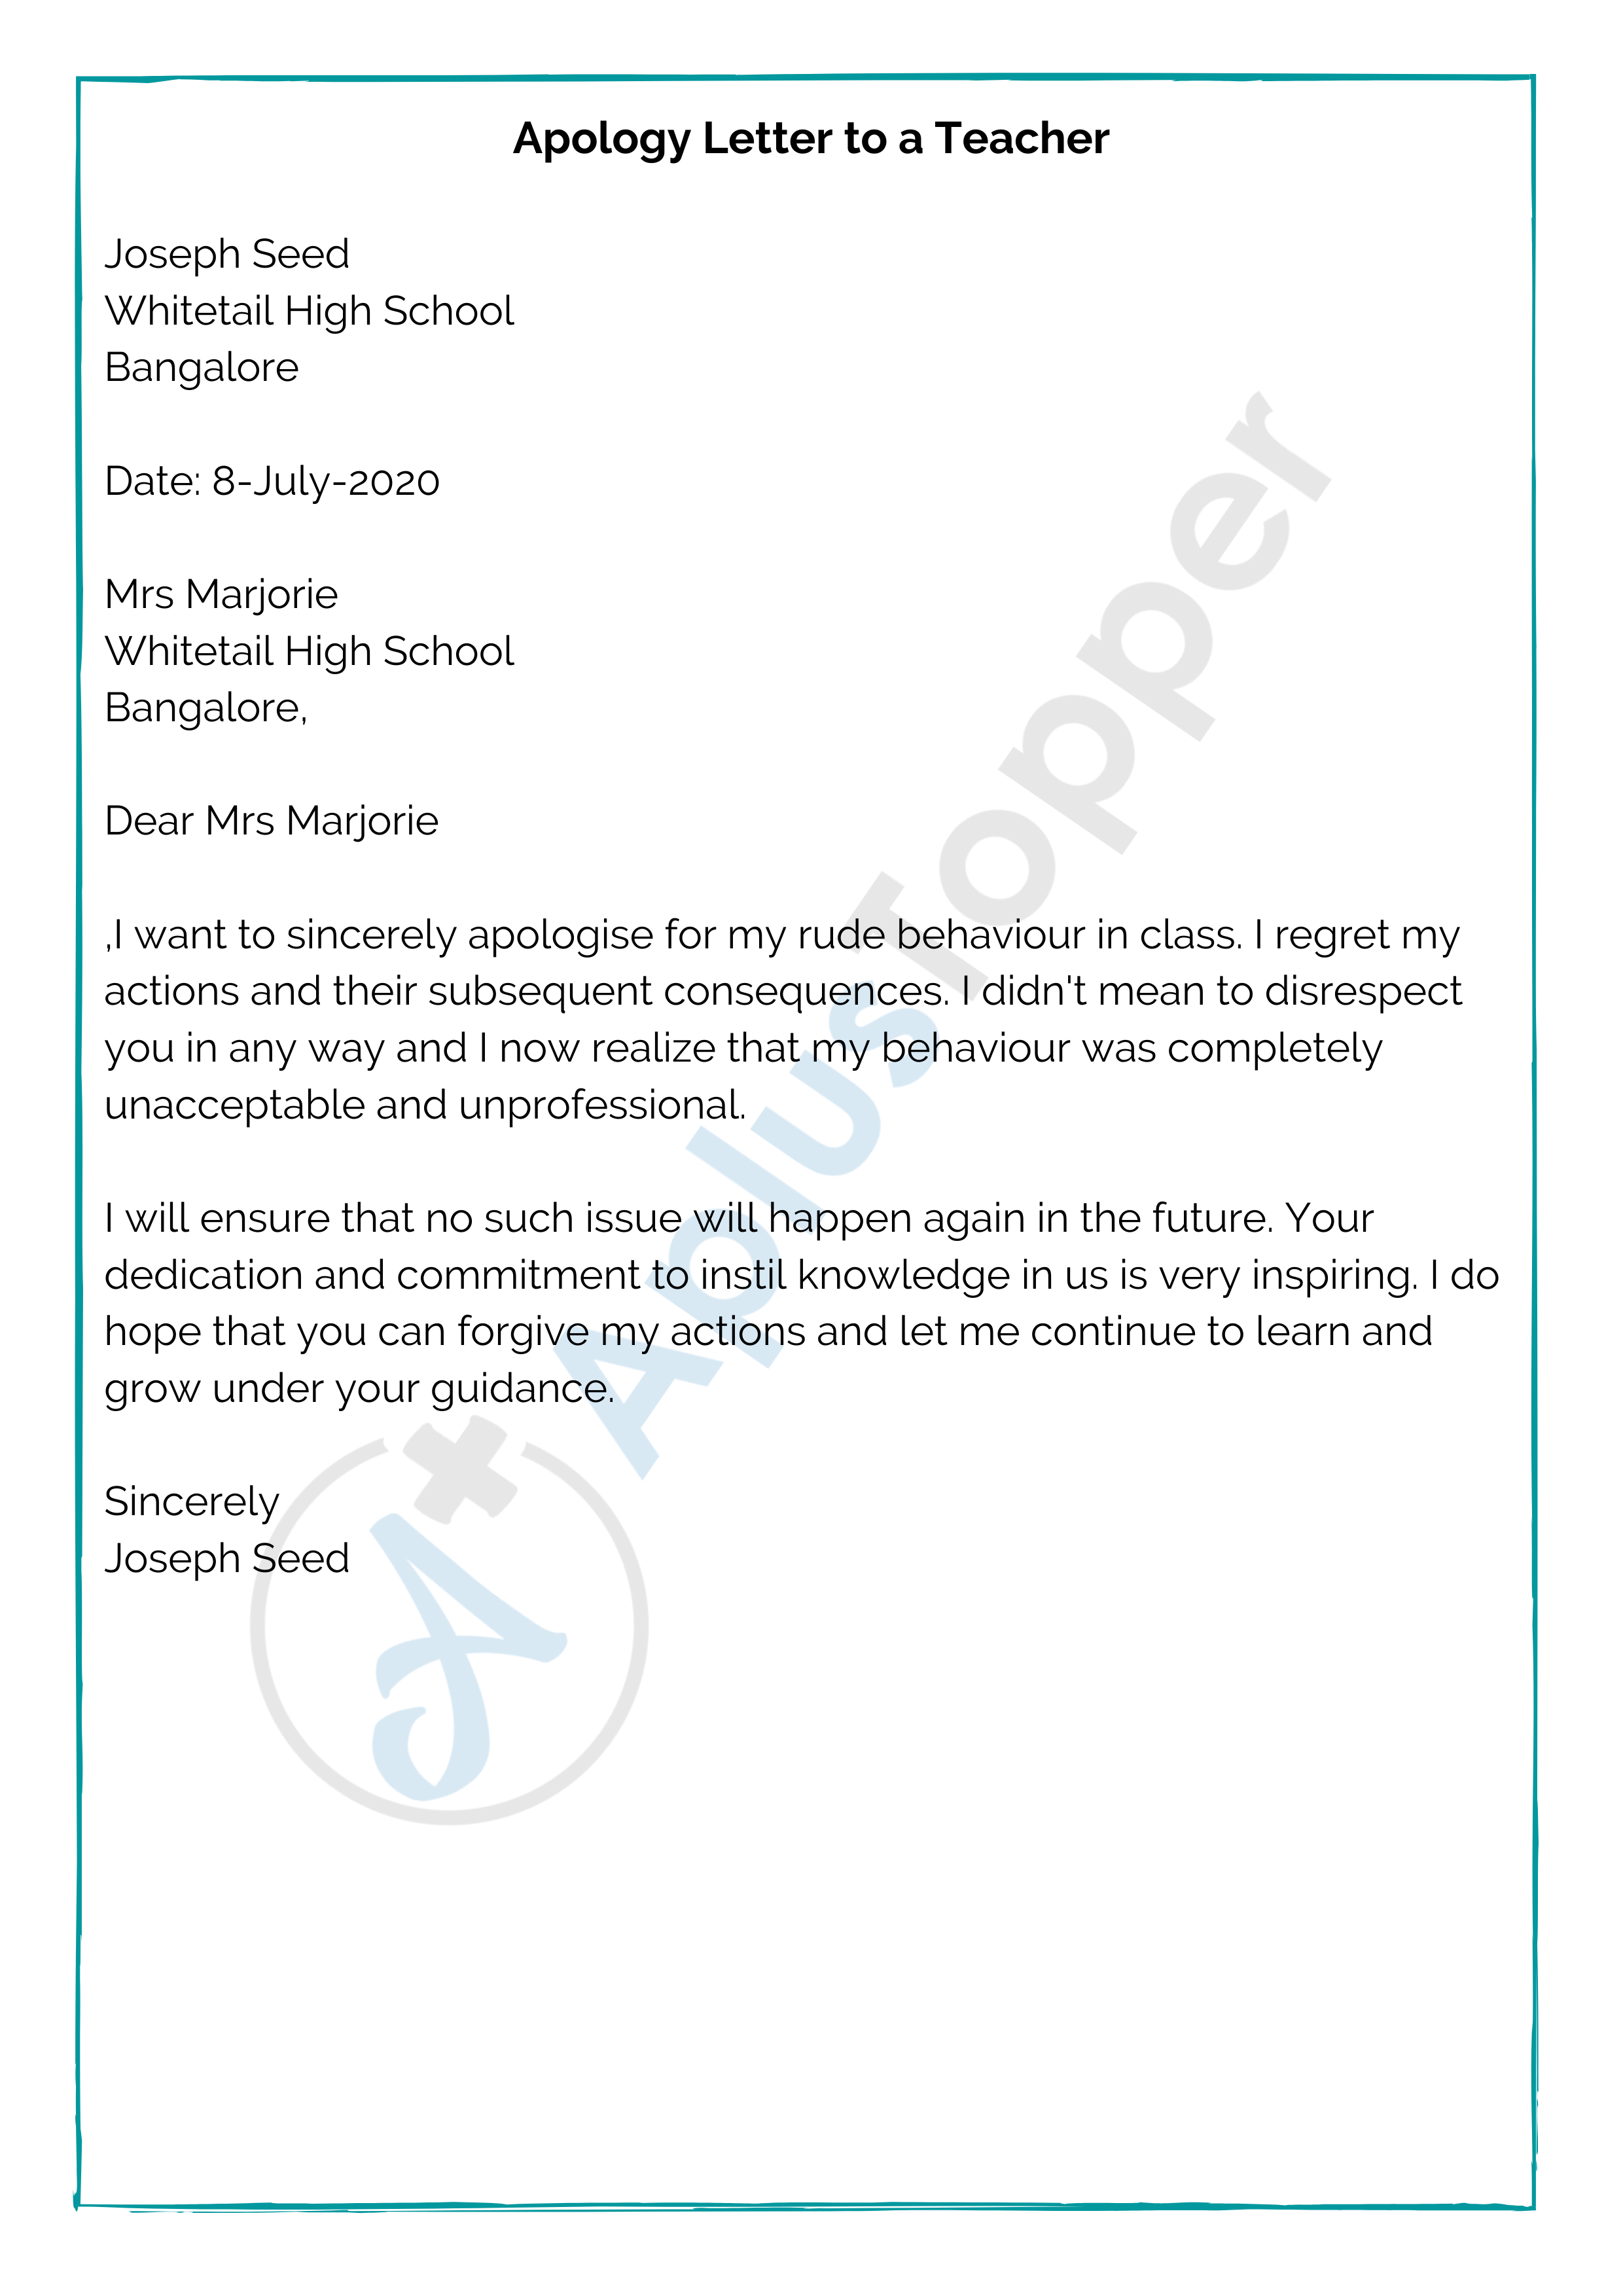 Apology Letter to a Teacher (Personal Letter)